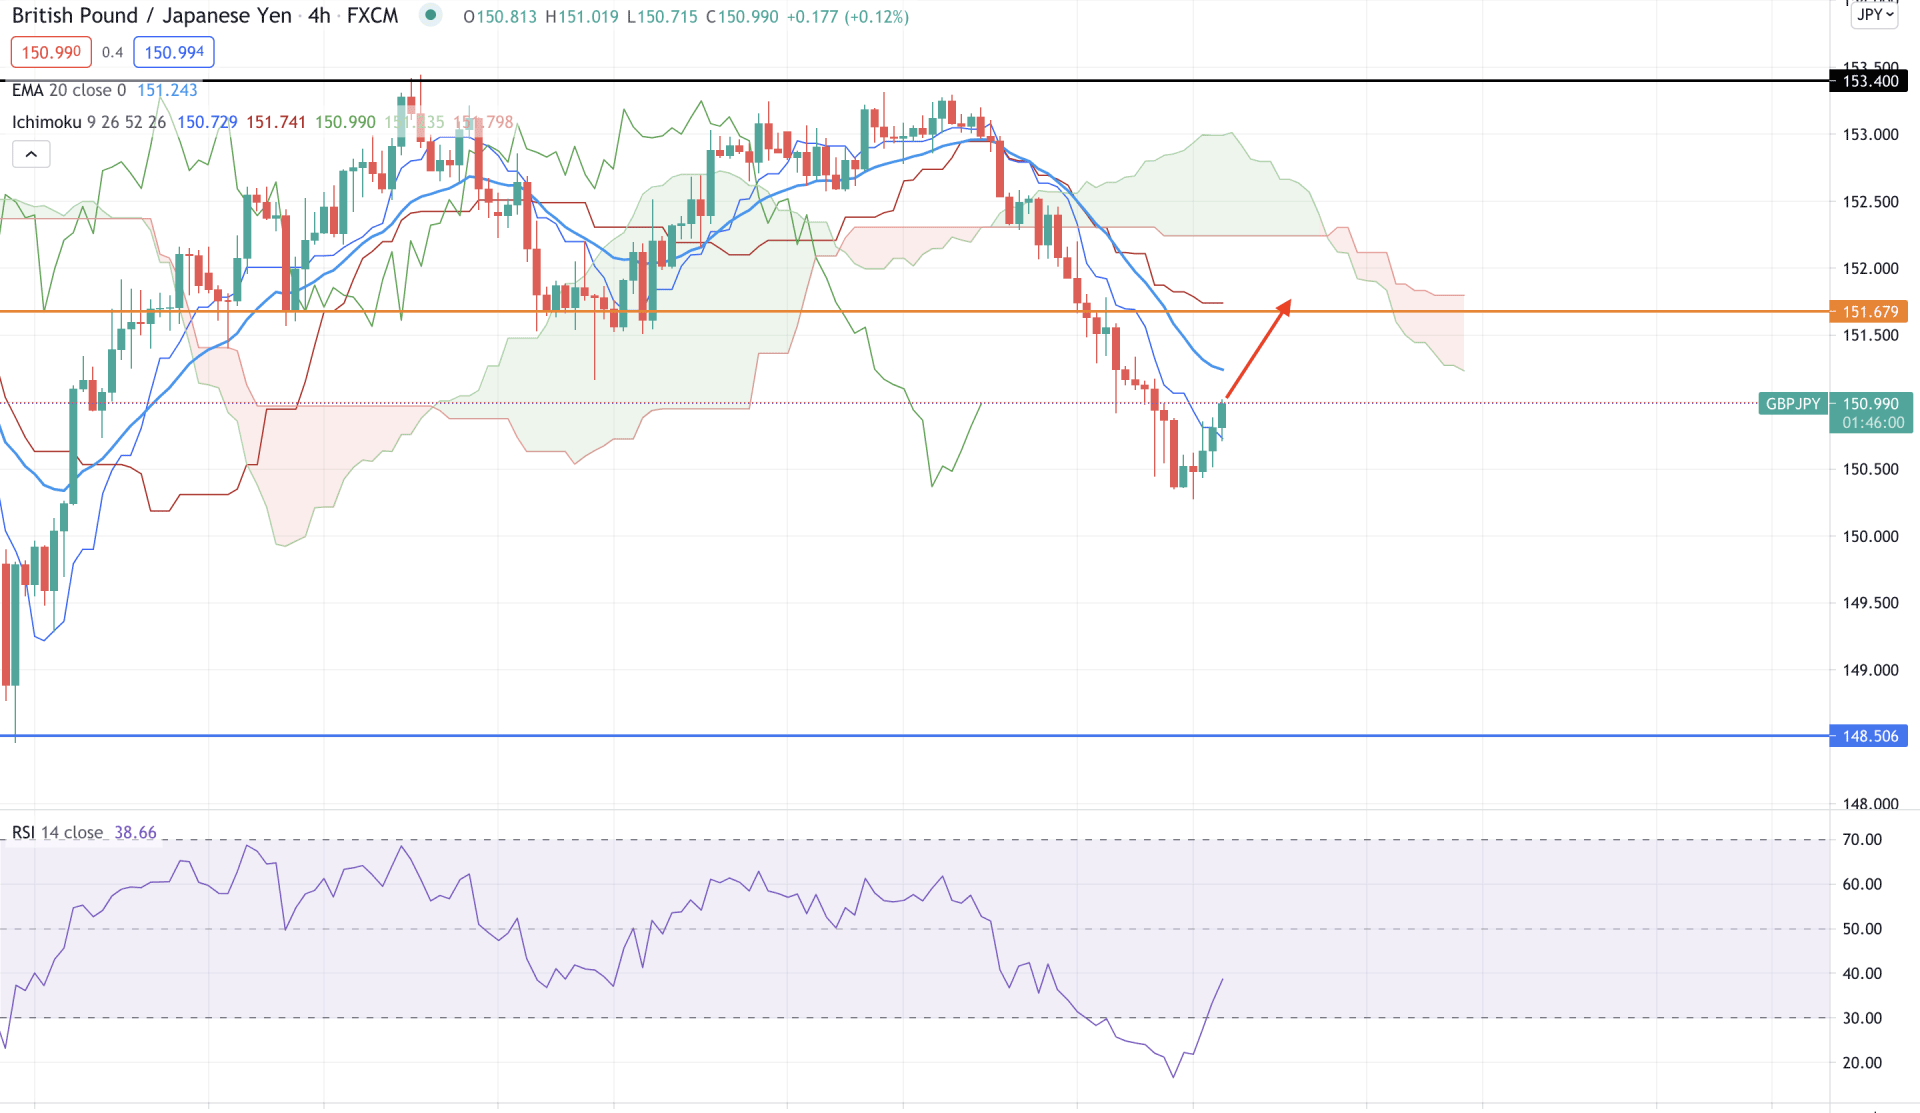 GBPJPY H4 Technical Analysis 18 August 2021